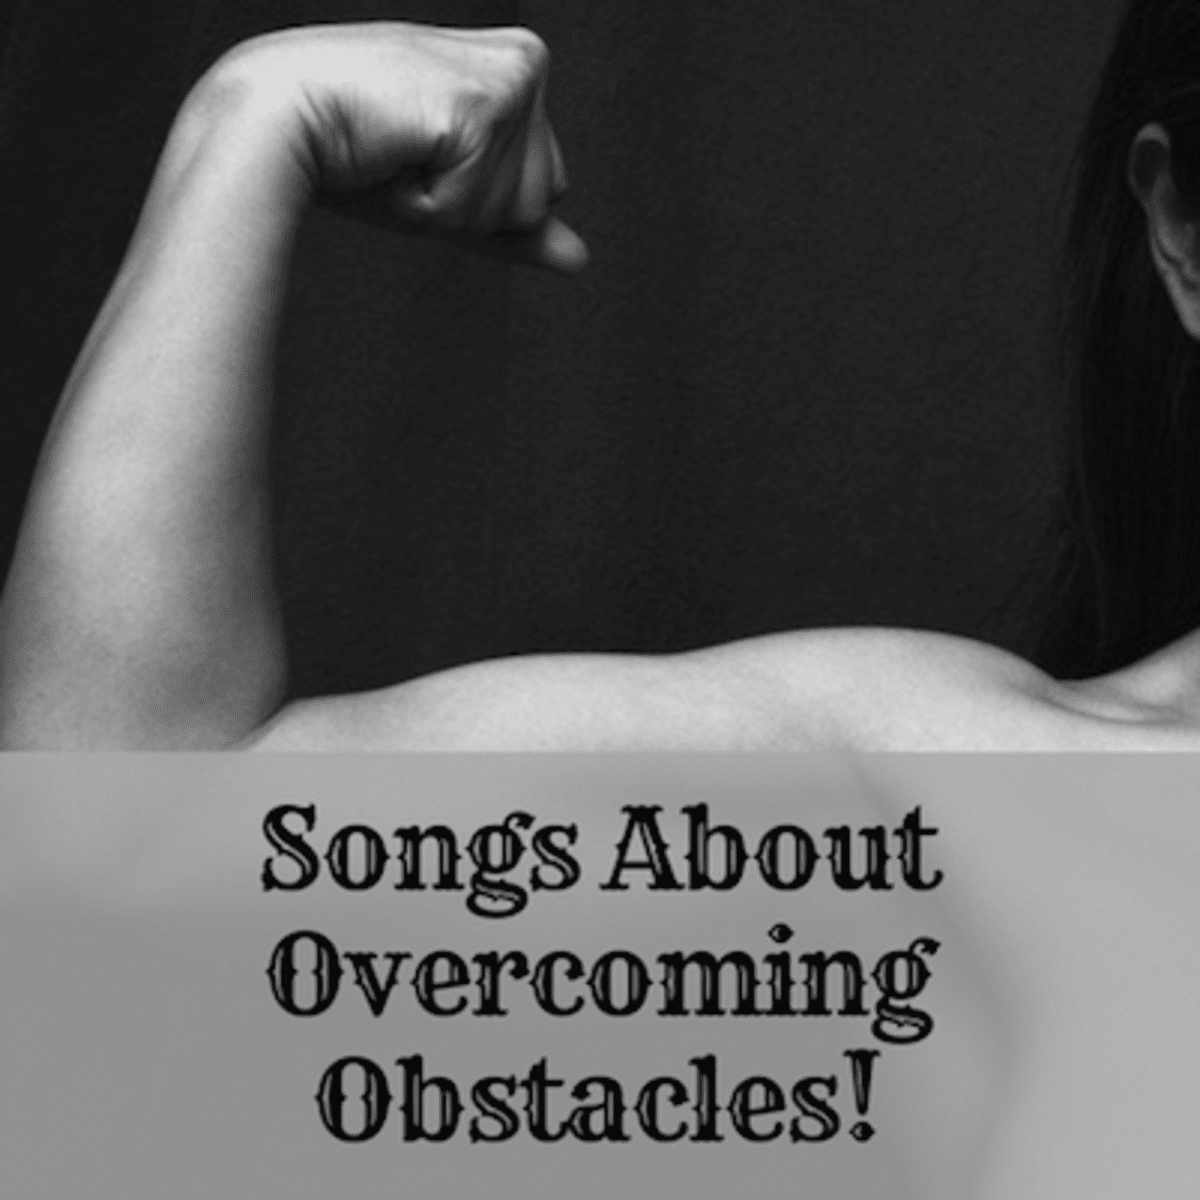 51 Songs About Overcoming Obstacles Adversity Hard Times Challenges And Not Giving Up Spinditty